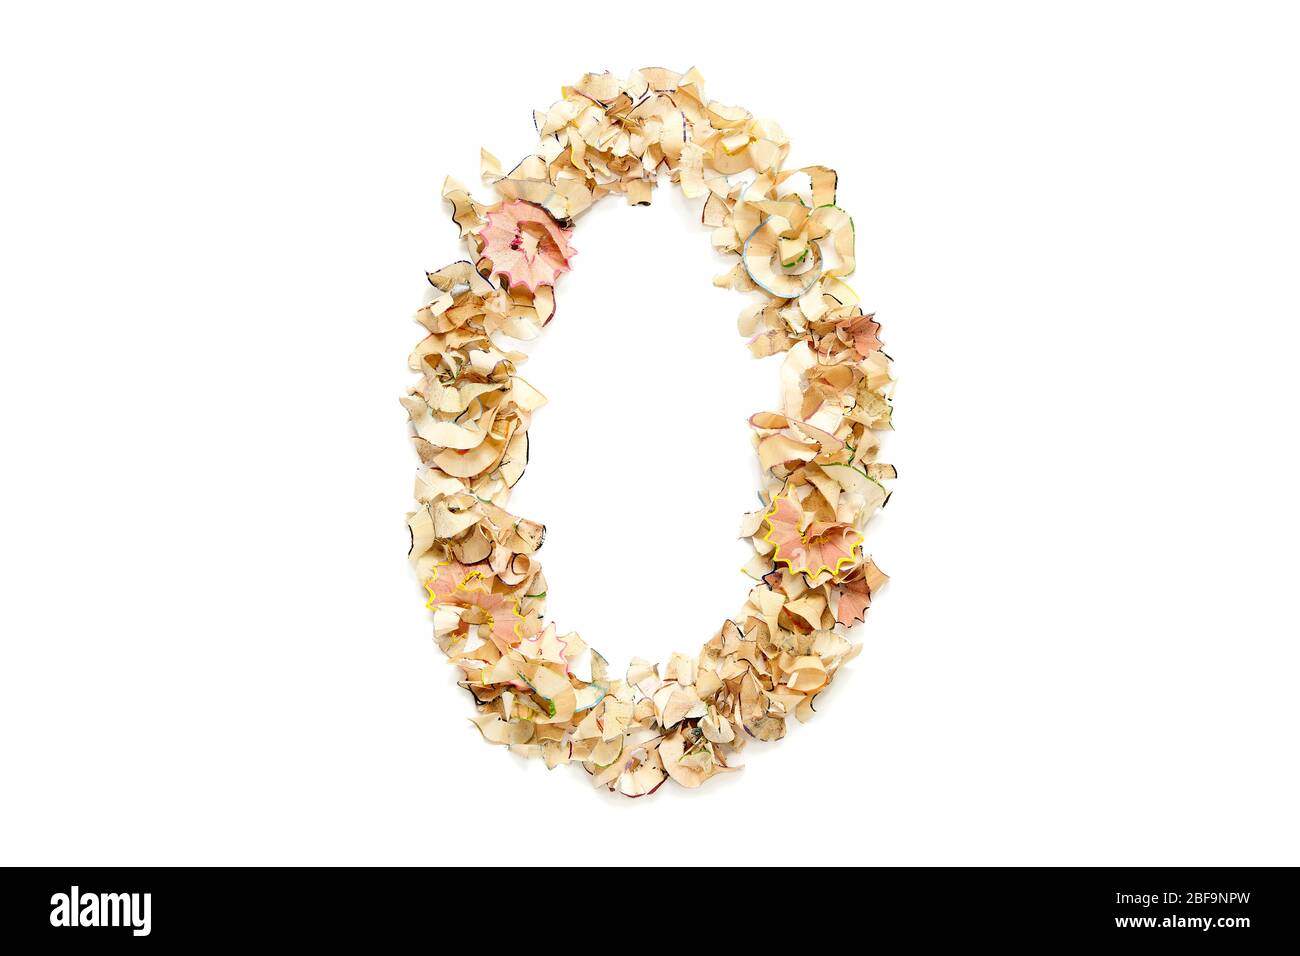 Letter O made from coloured pencil shavings for use in your design. Stock Photo